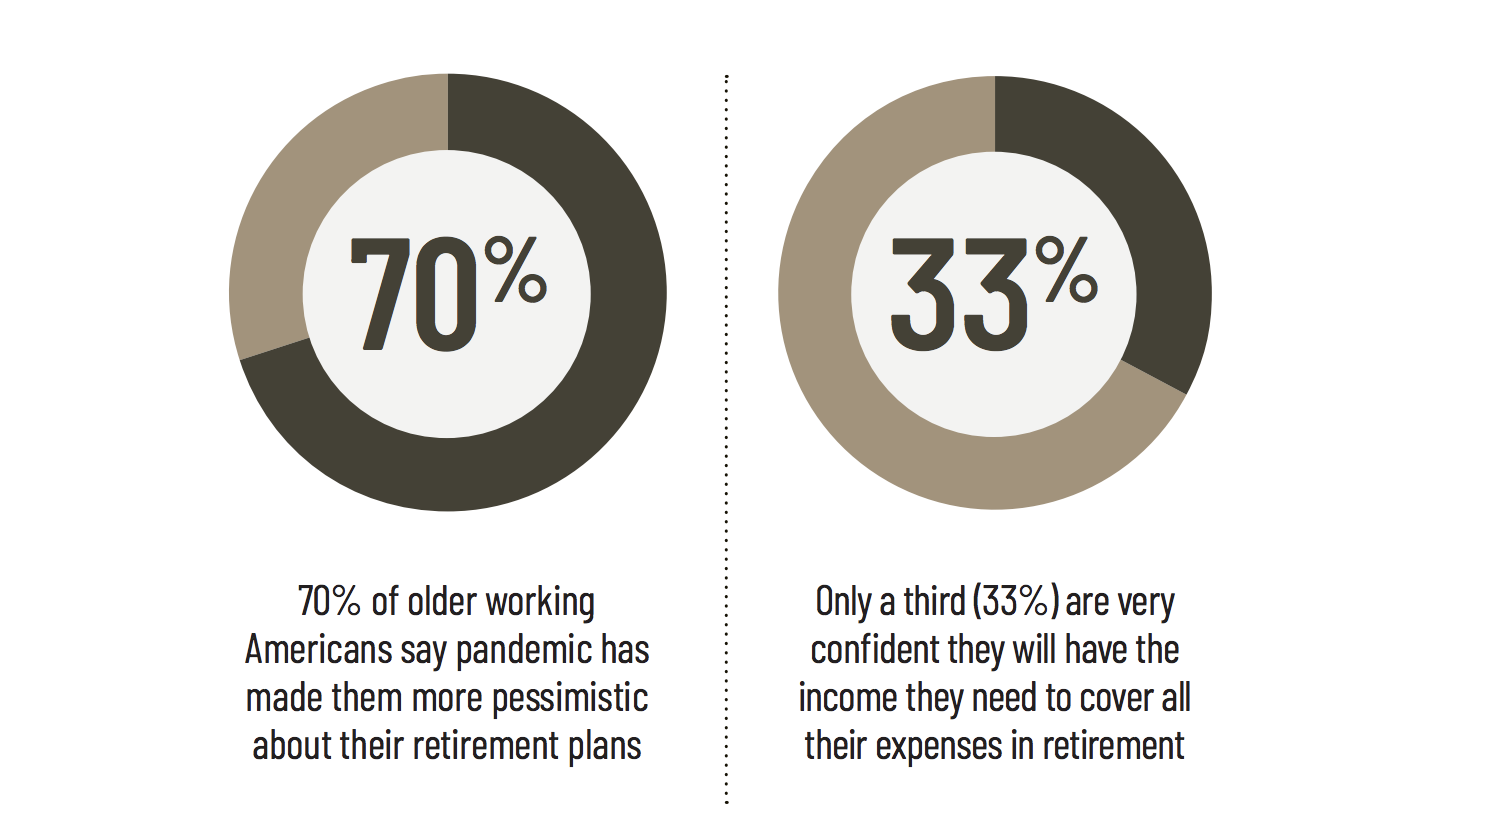 70% of older working Americans say pandemic has made them more pessimistic about their retirement plans; Only a third (33%) are very confident they will have the income they need to cover all their expenses in retirement